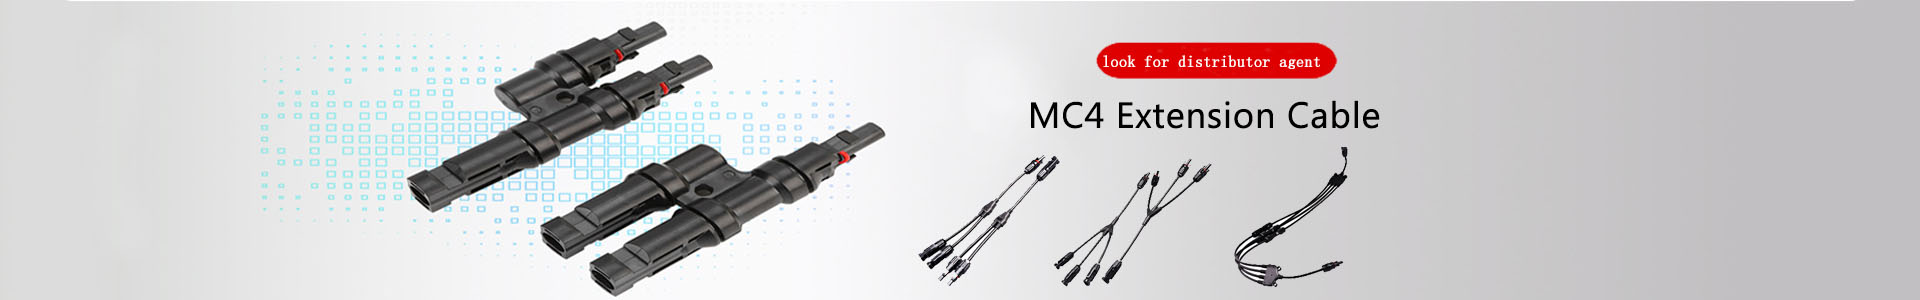 MC4 Extension Cable | Handwe Group-Solar | solar connector,solar branch connector,diode fuse connector,MC4 extnsion cable,H1Z2Z2 solar cable, UL4703 solar cable | Leading manufacturer and supplier of solar pv cables and connectors